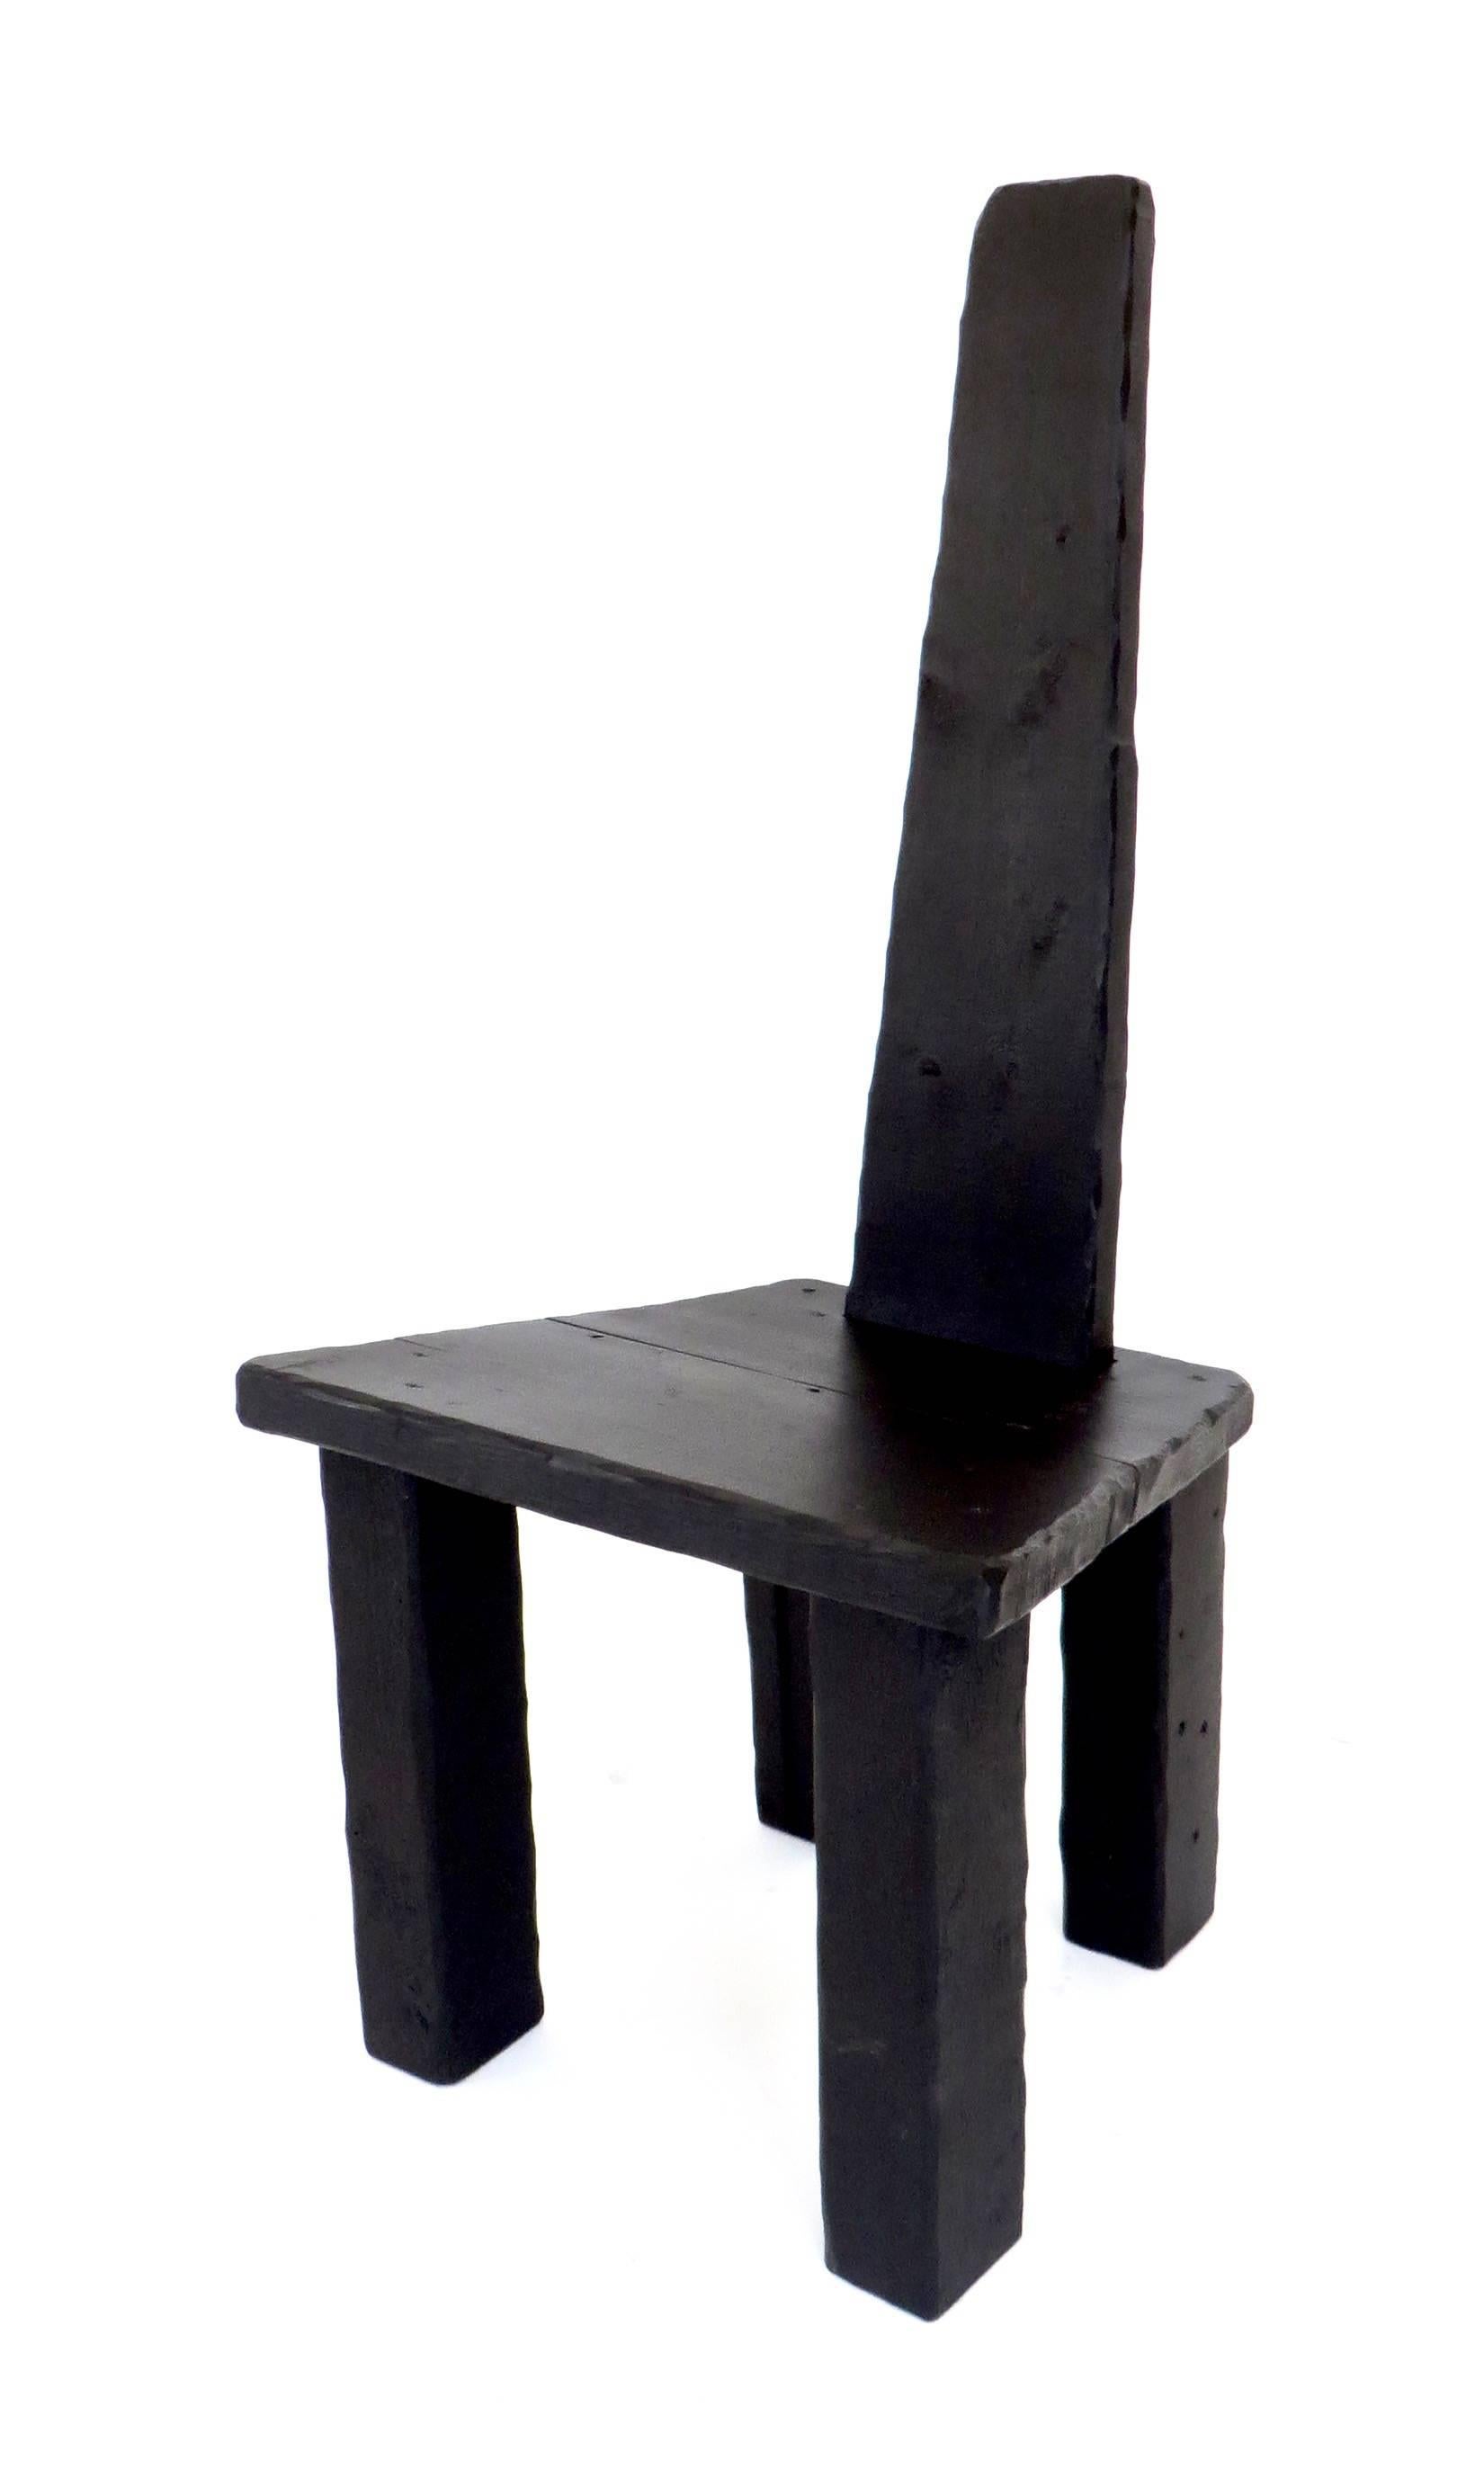 American Contemporary Anthropological Collection Chair by Artist Hannah Vaughn, 2017